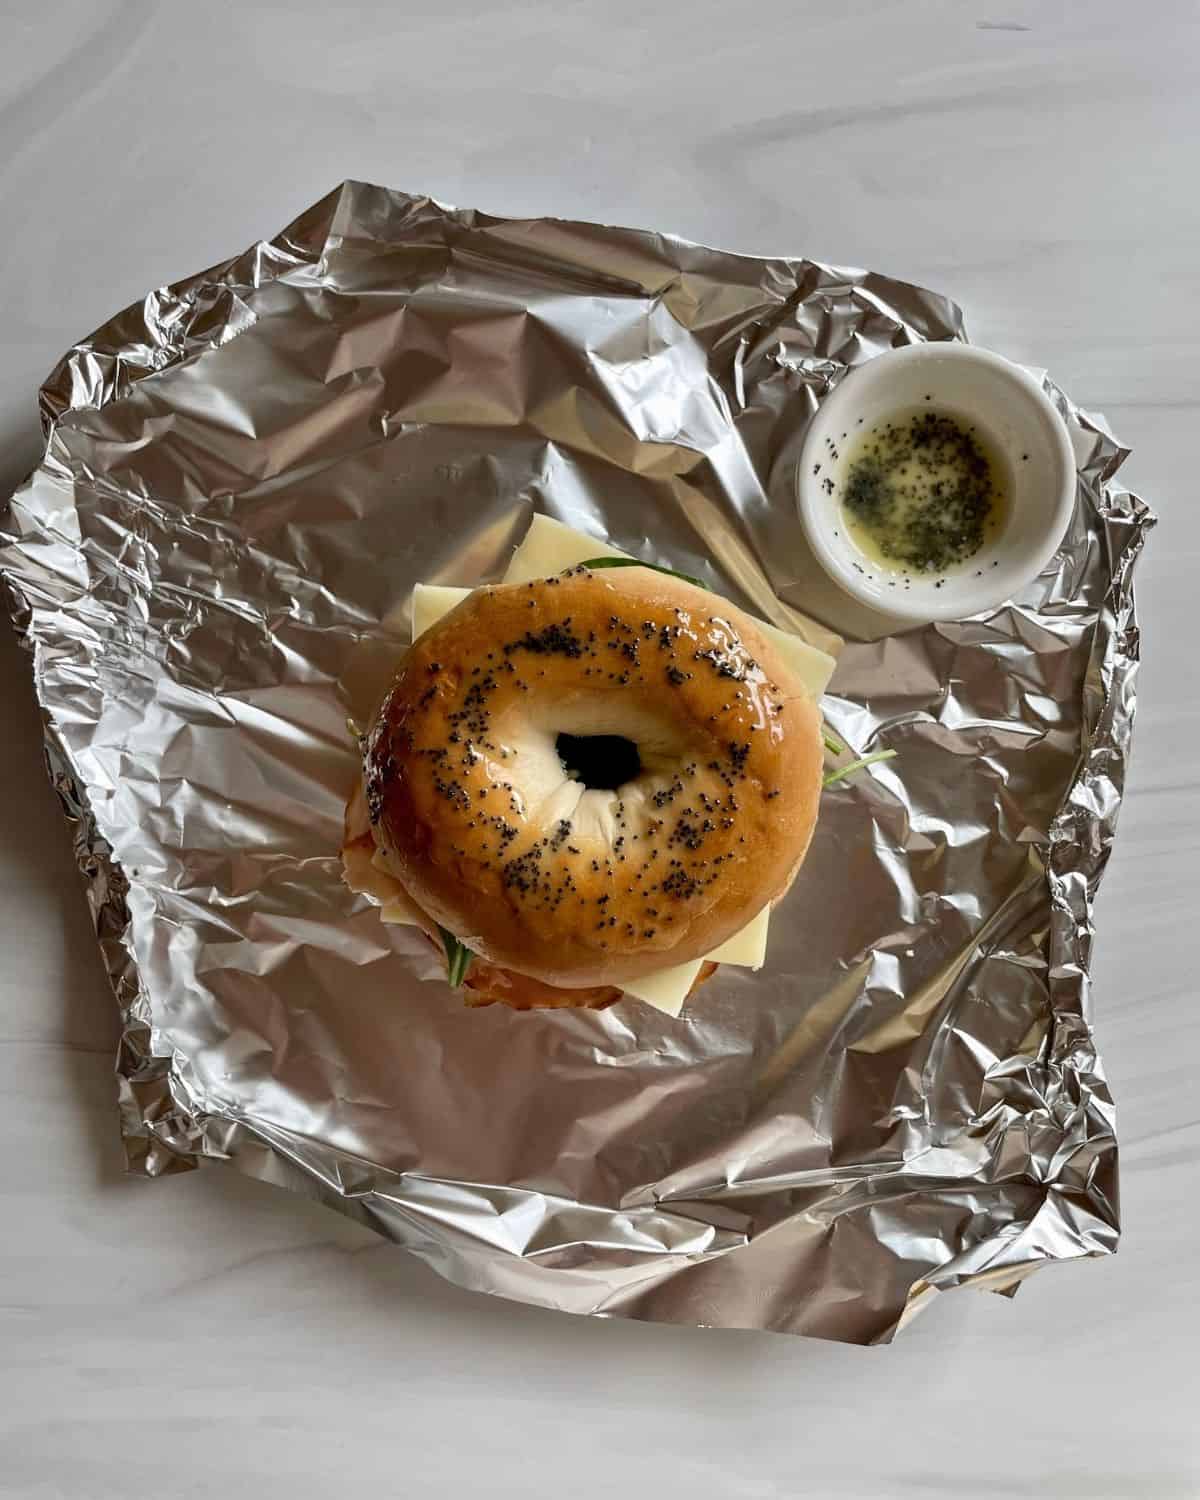 Bagel on tinfoil with poppy seed butter in a small bowl to the right.